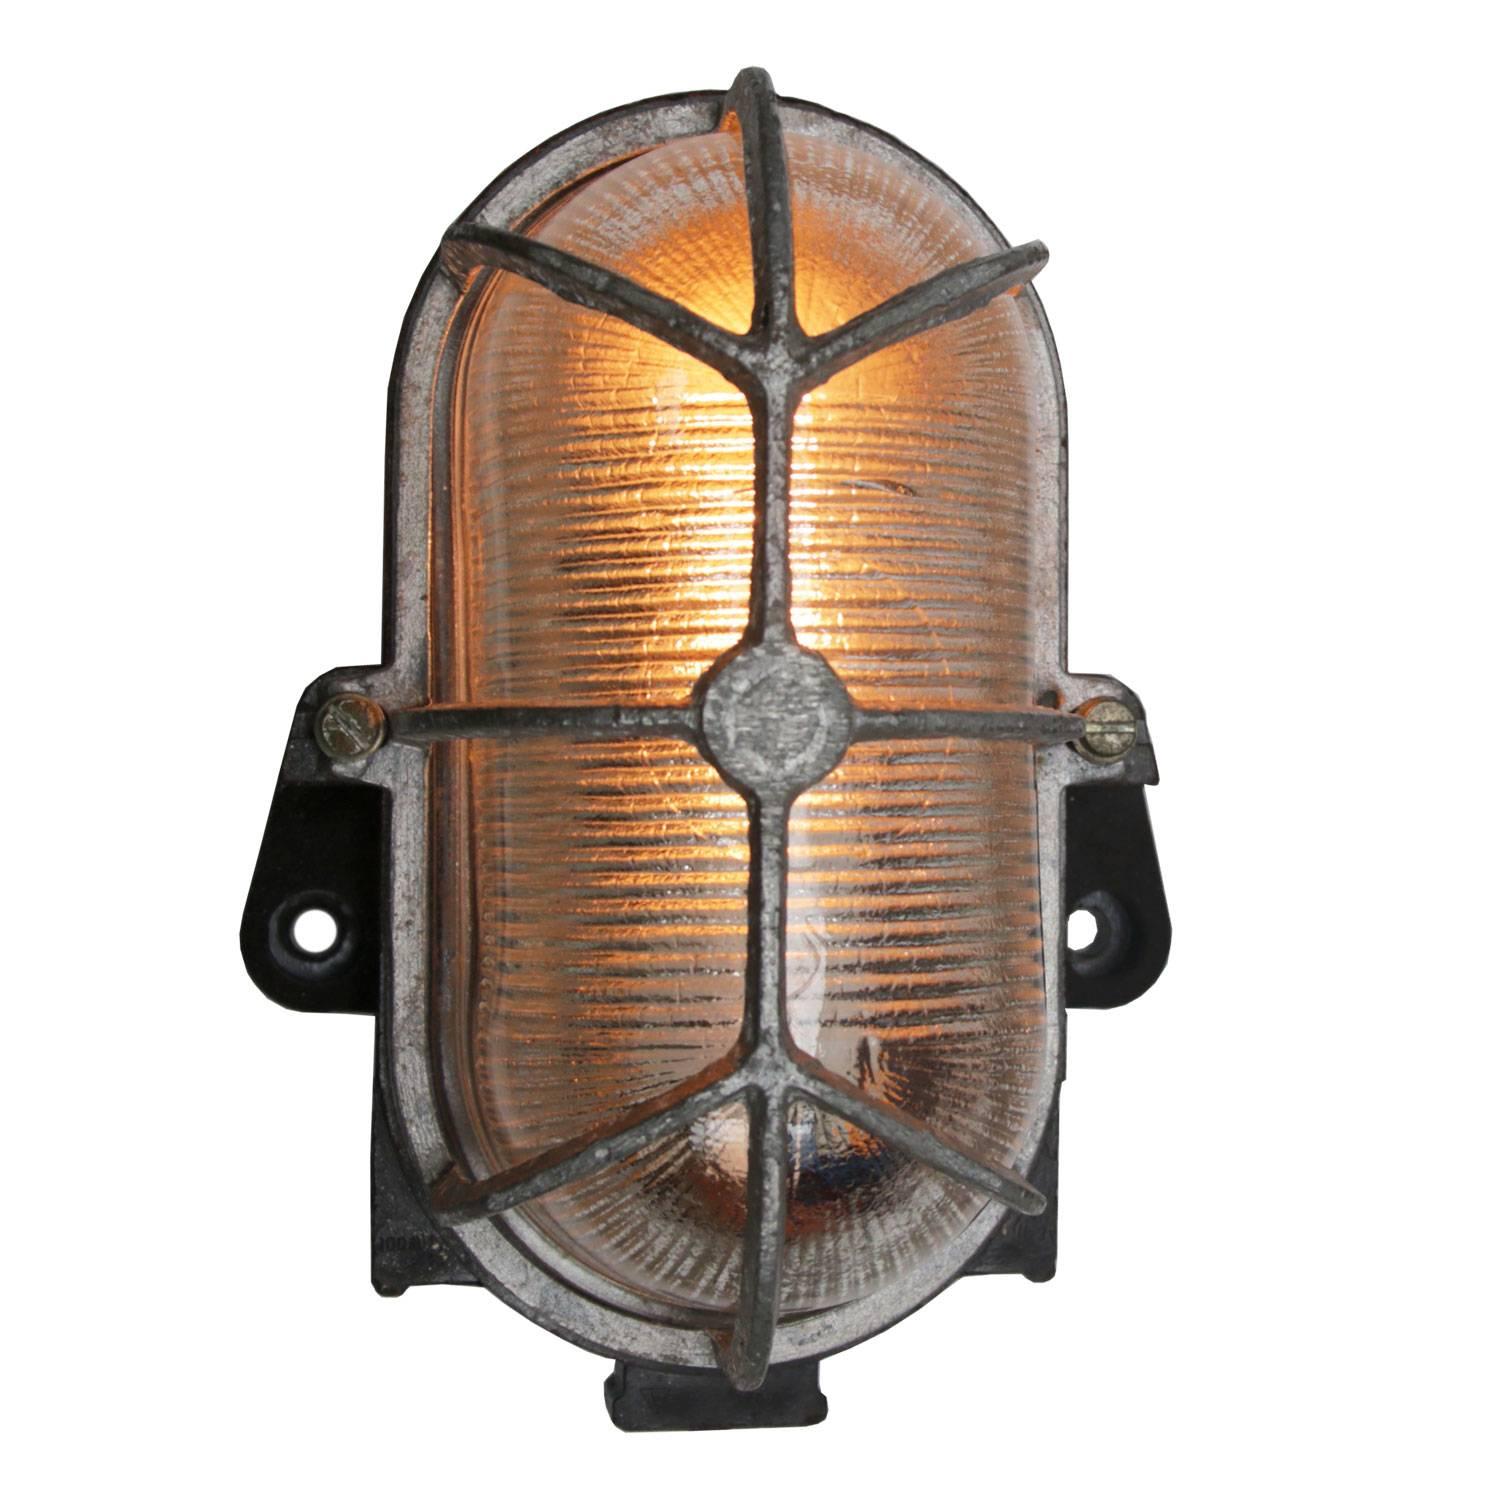 Industrial wall and ceiling scone. Bakelite back. 
Holophane striped glass.
Aluminum frame.

Weight: 0.8 kg / 1.8 lb

Priced individual item. All lamps have been made suitable by international standards for incandescent light bulbs,